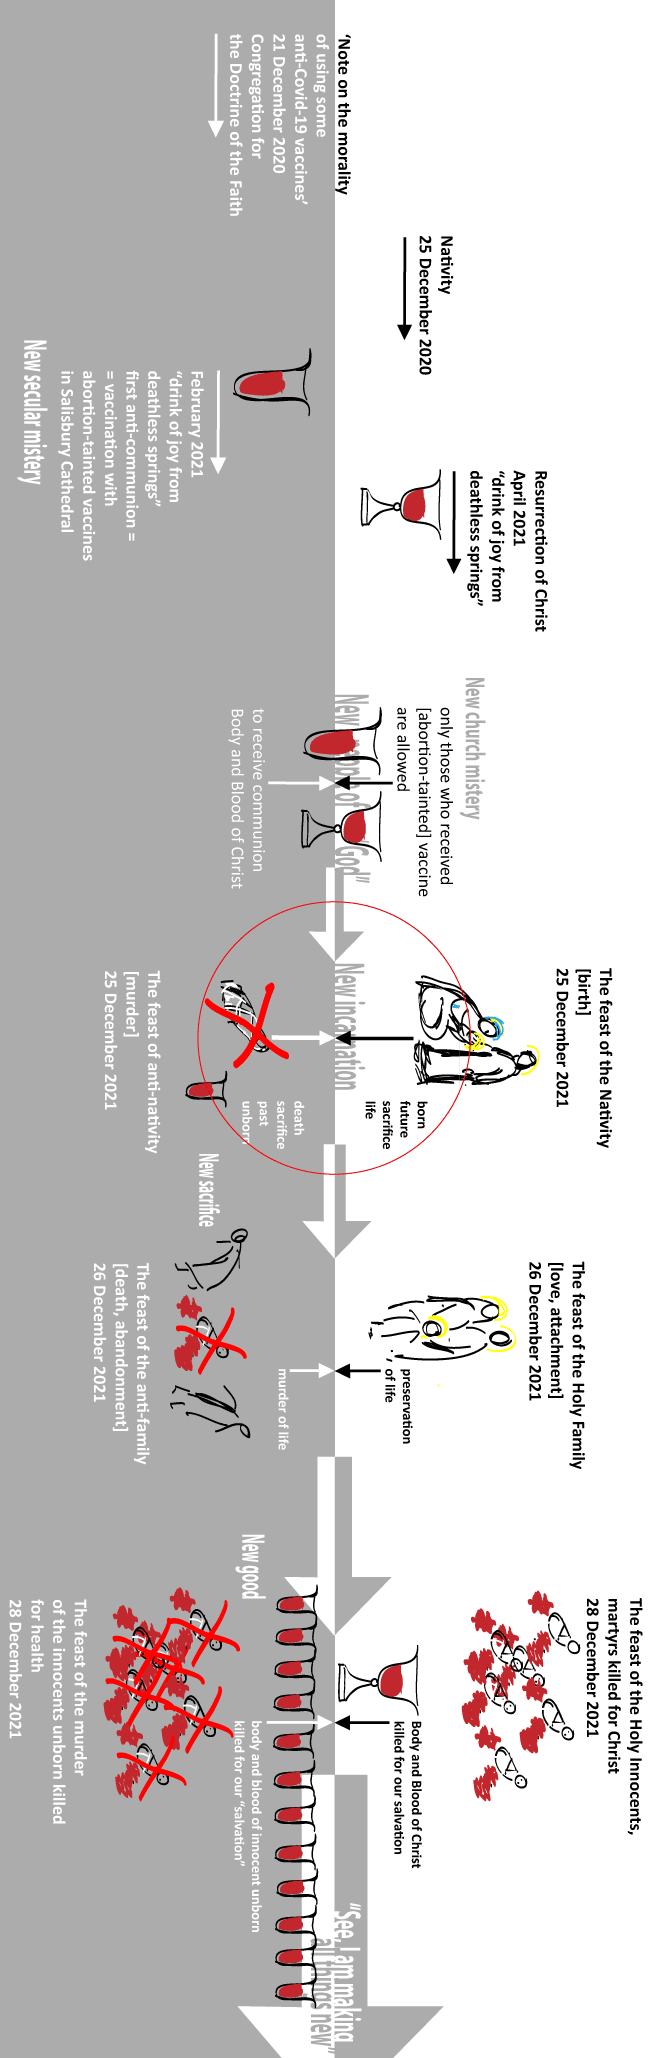 Formation of a new liturgical reality, diagram